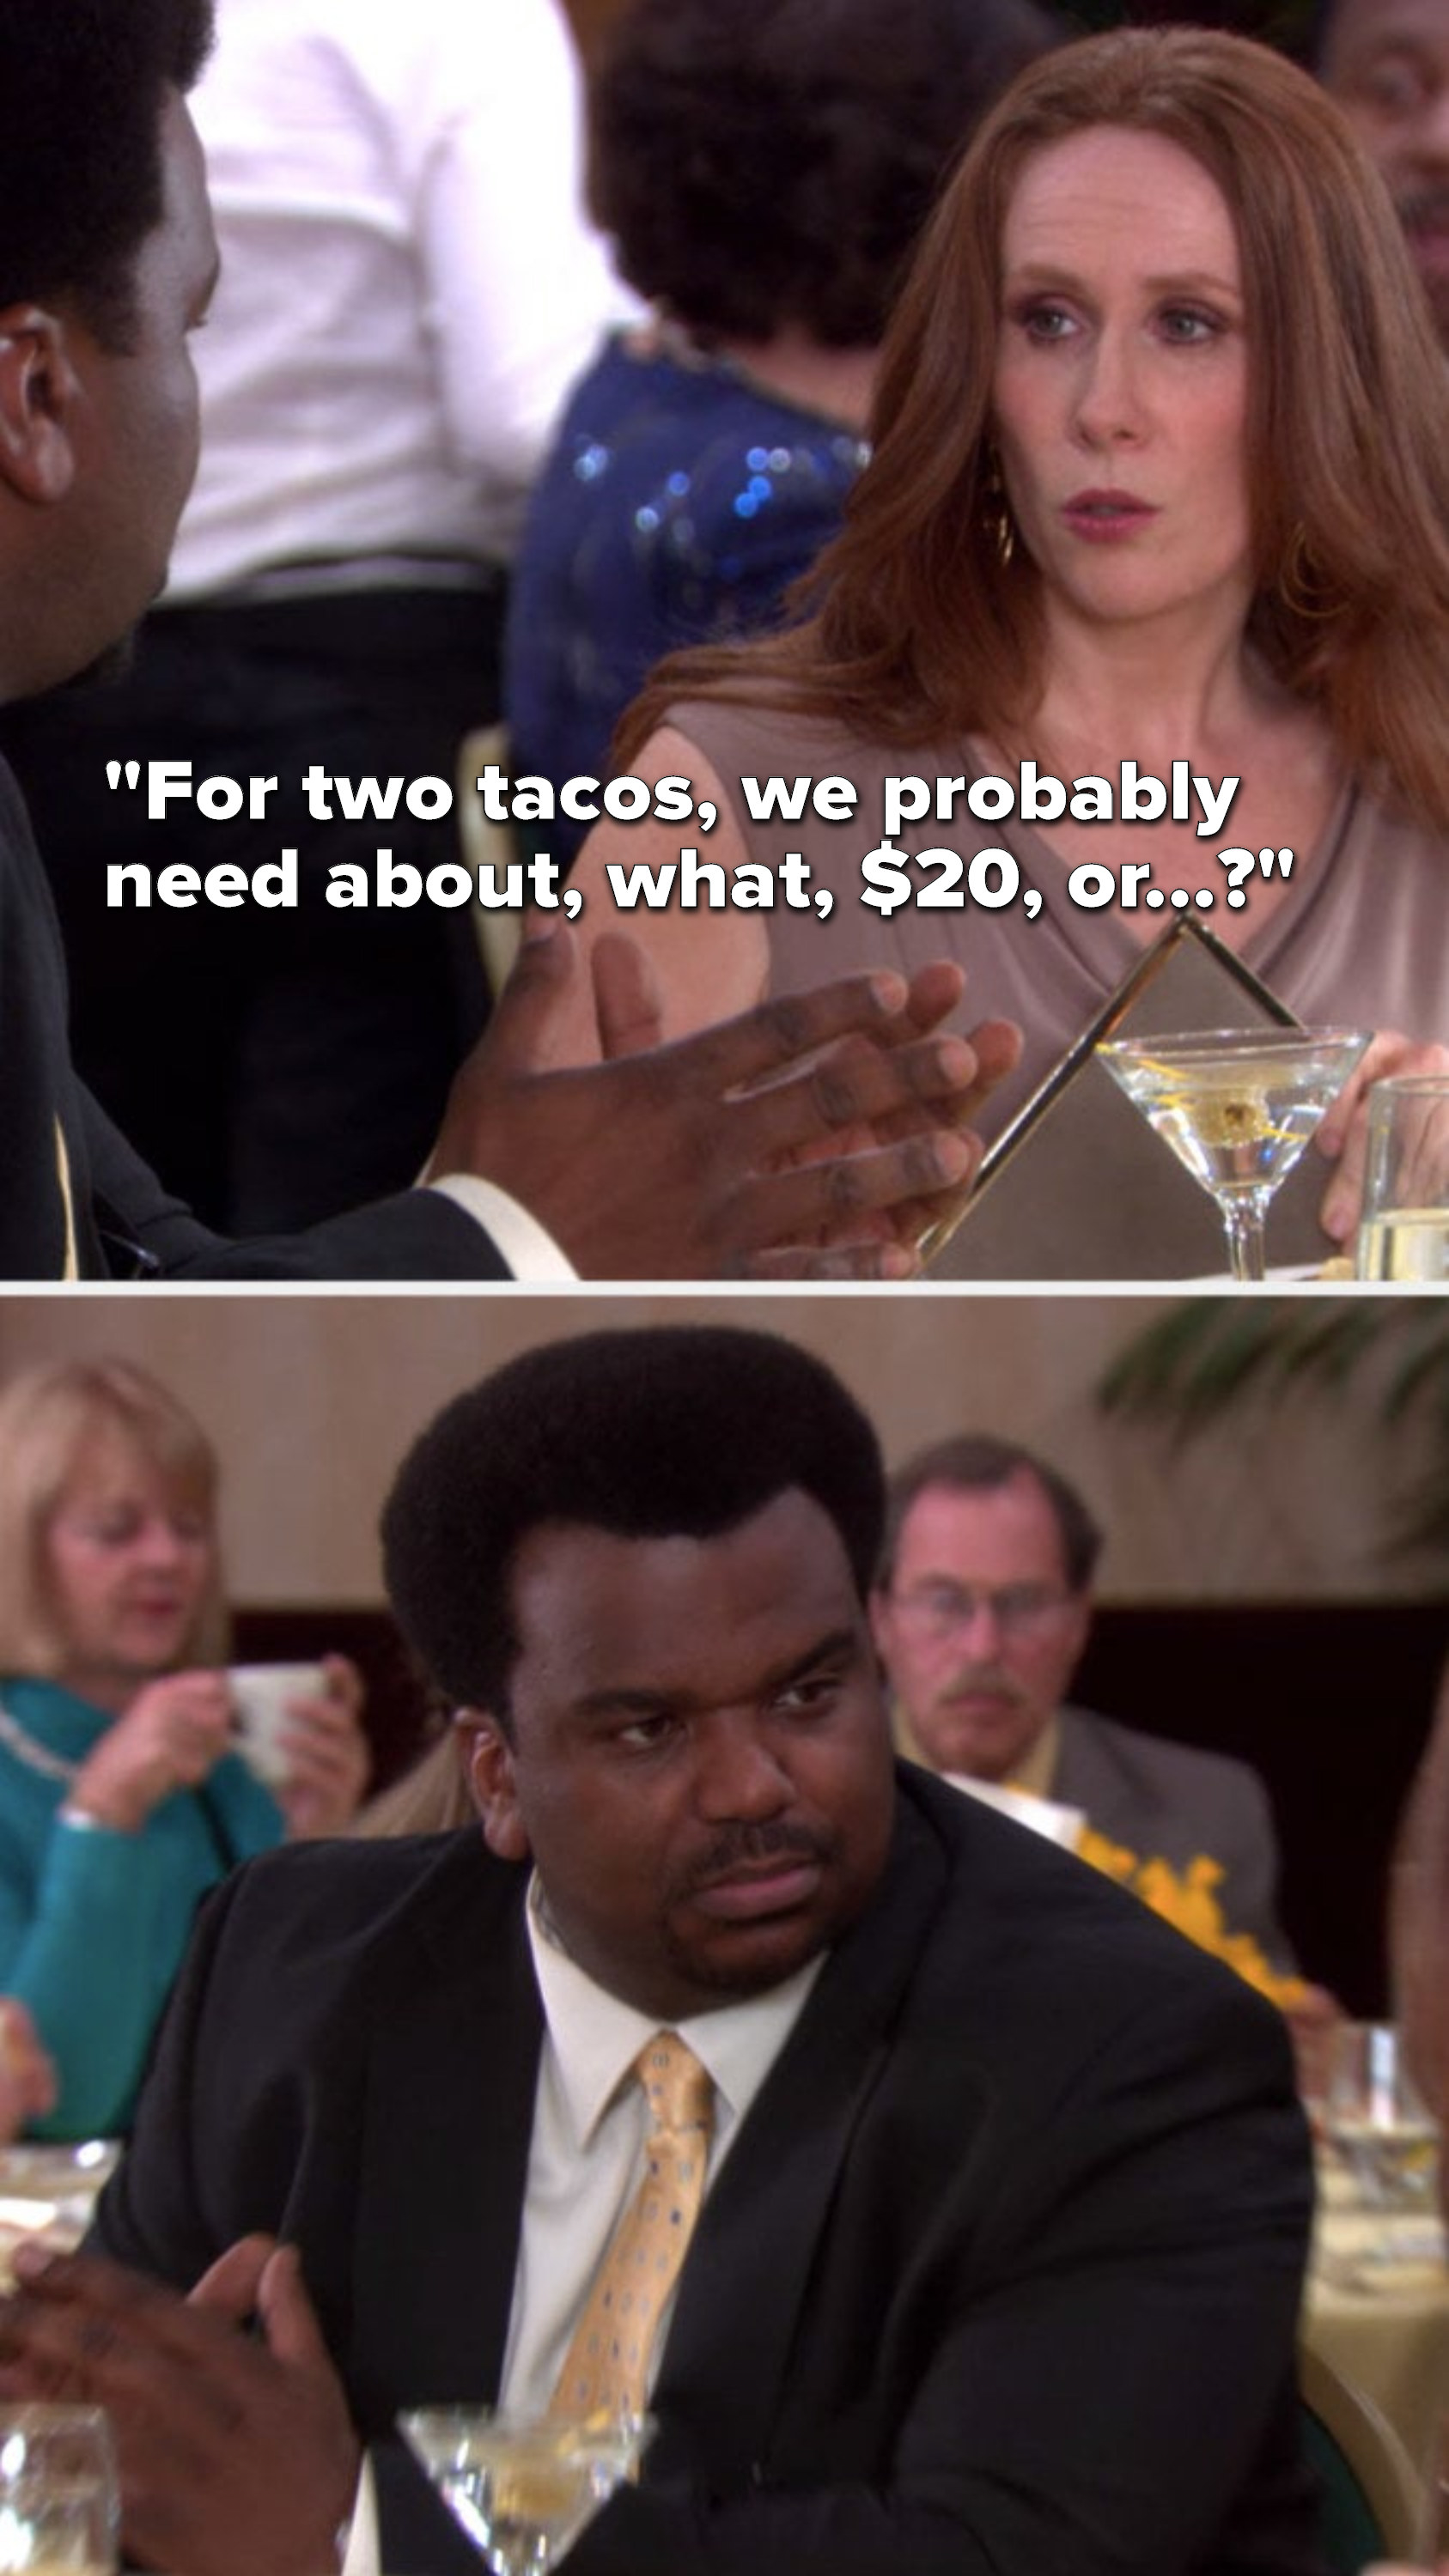 Nellie says, &quot;For two tacos, we probably need about, what, $20, or...&quot; and Darryl looks at her